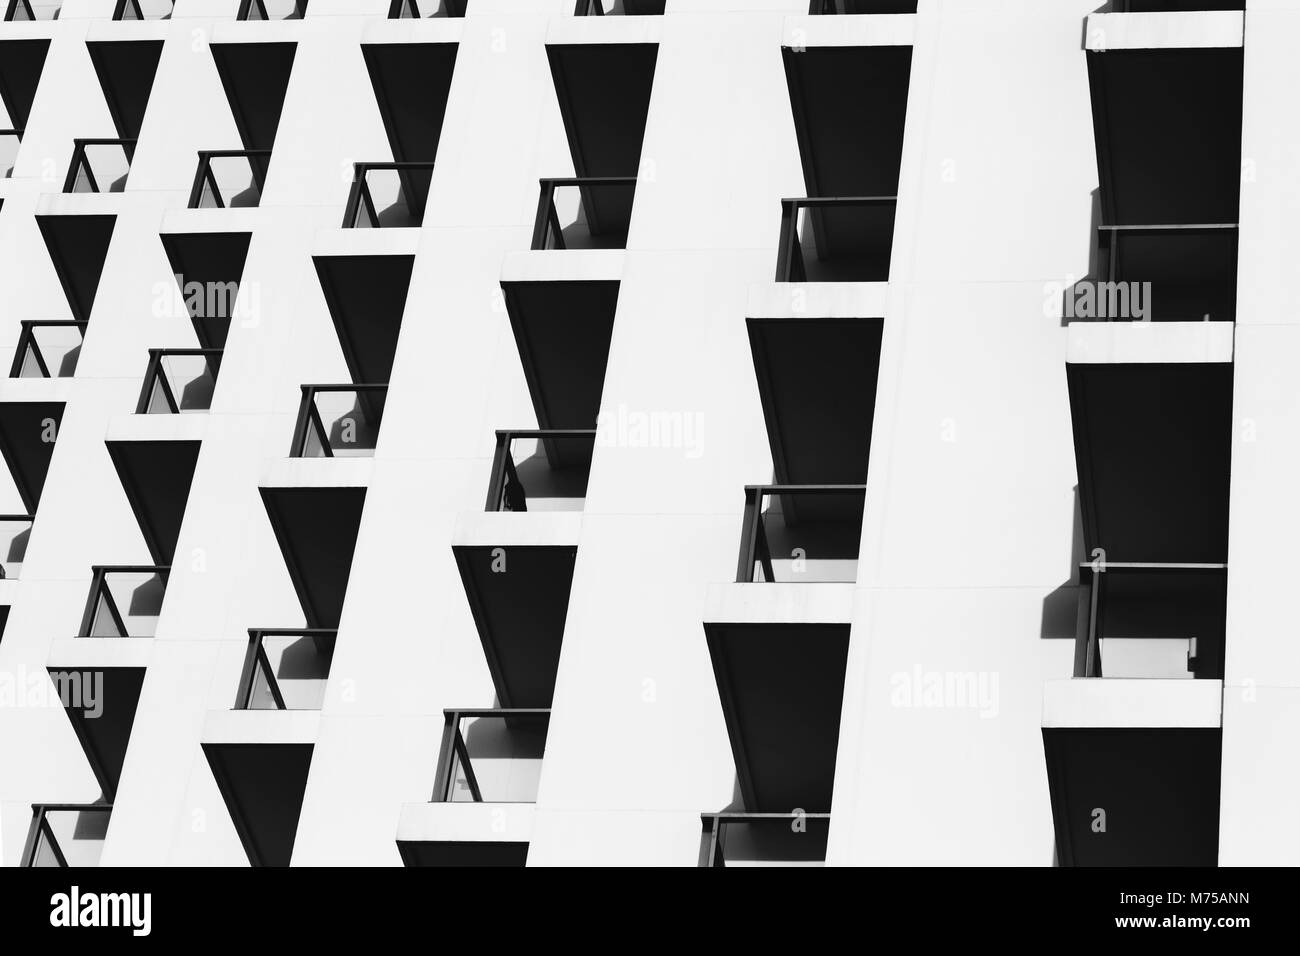 beautiful light and shadow on building balconies of the vintage hotel at the summertime. black and white photo of architecture design. Stock Photo